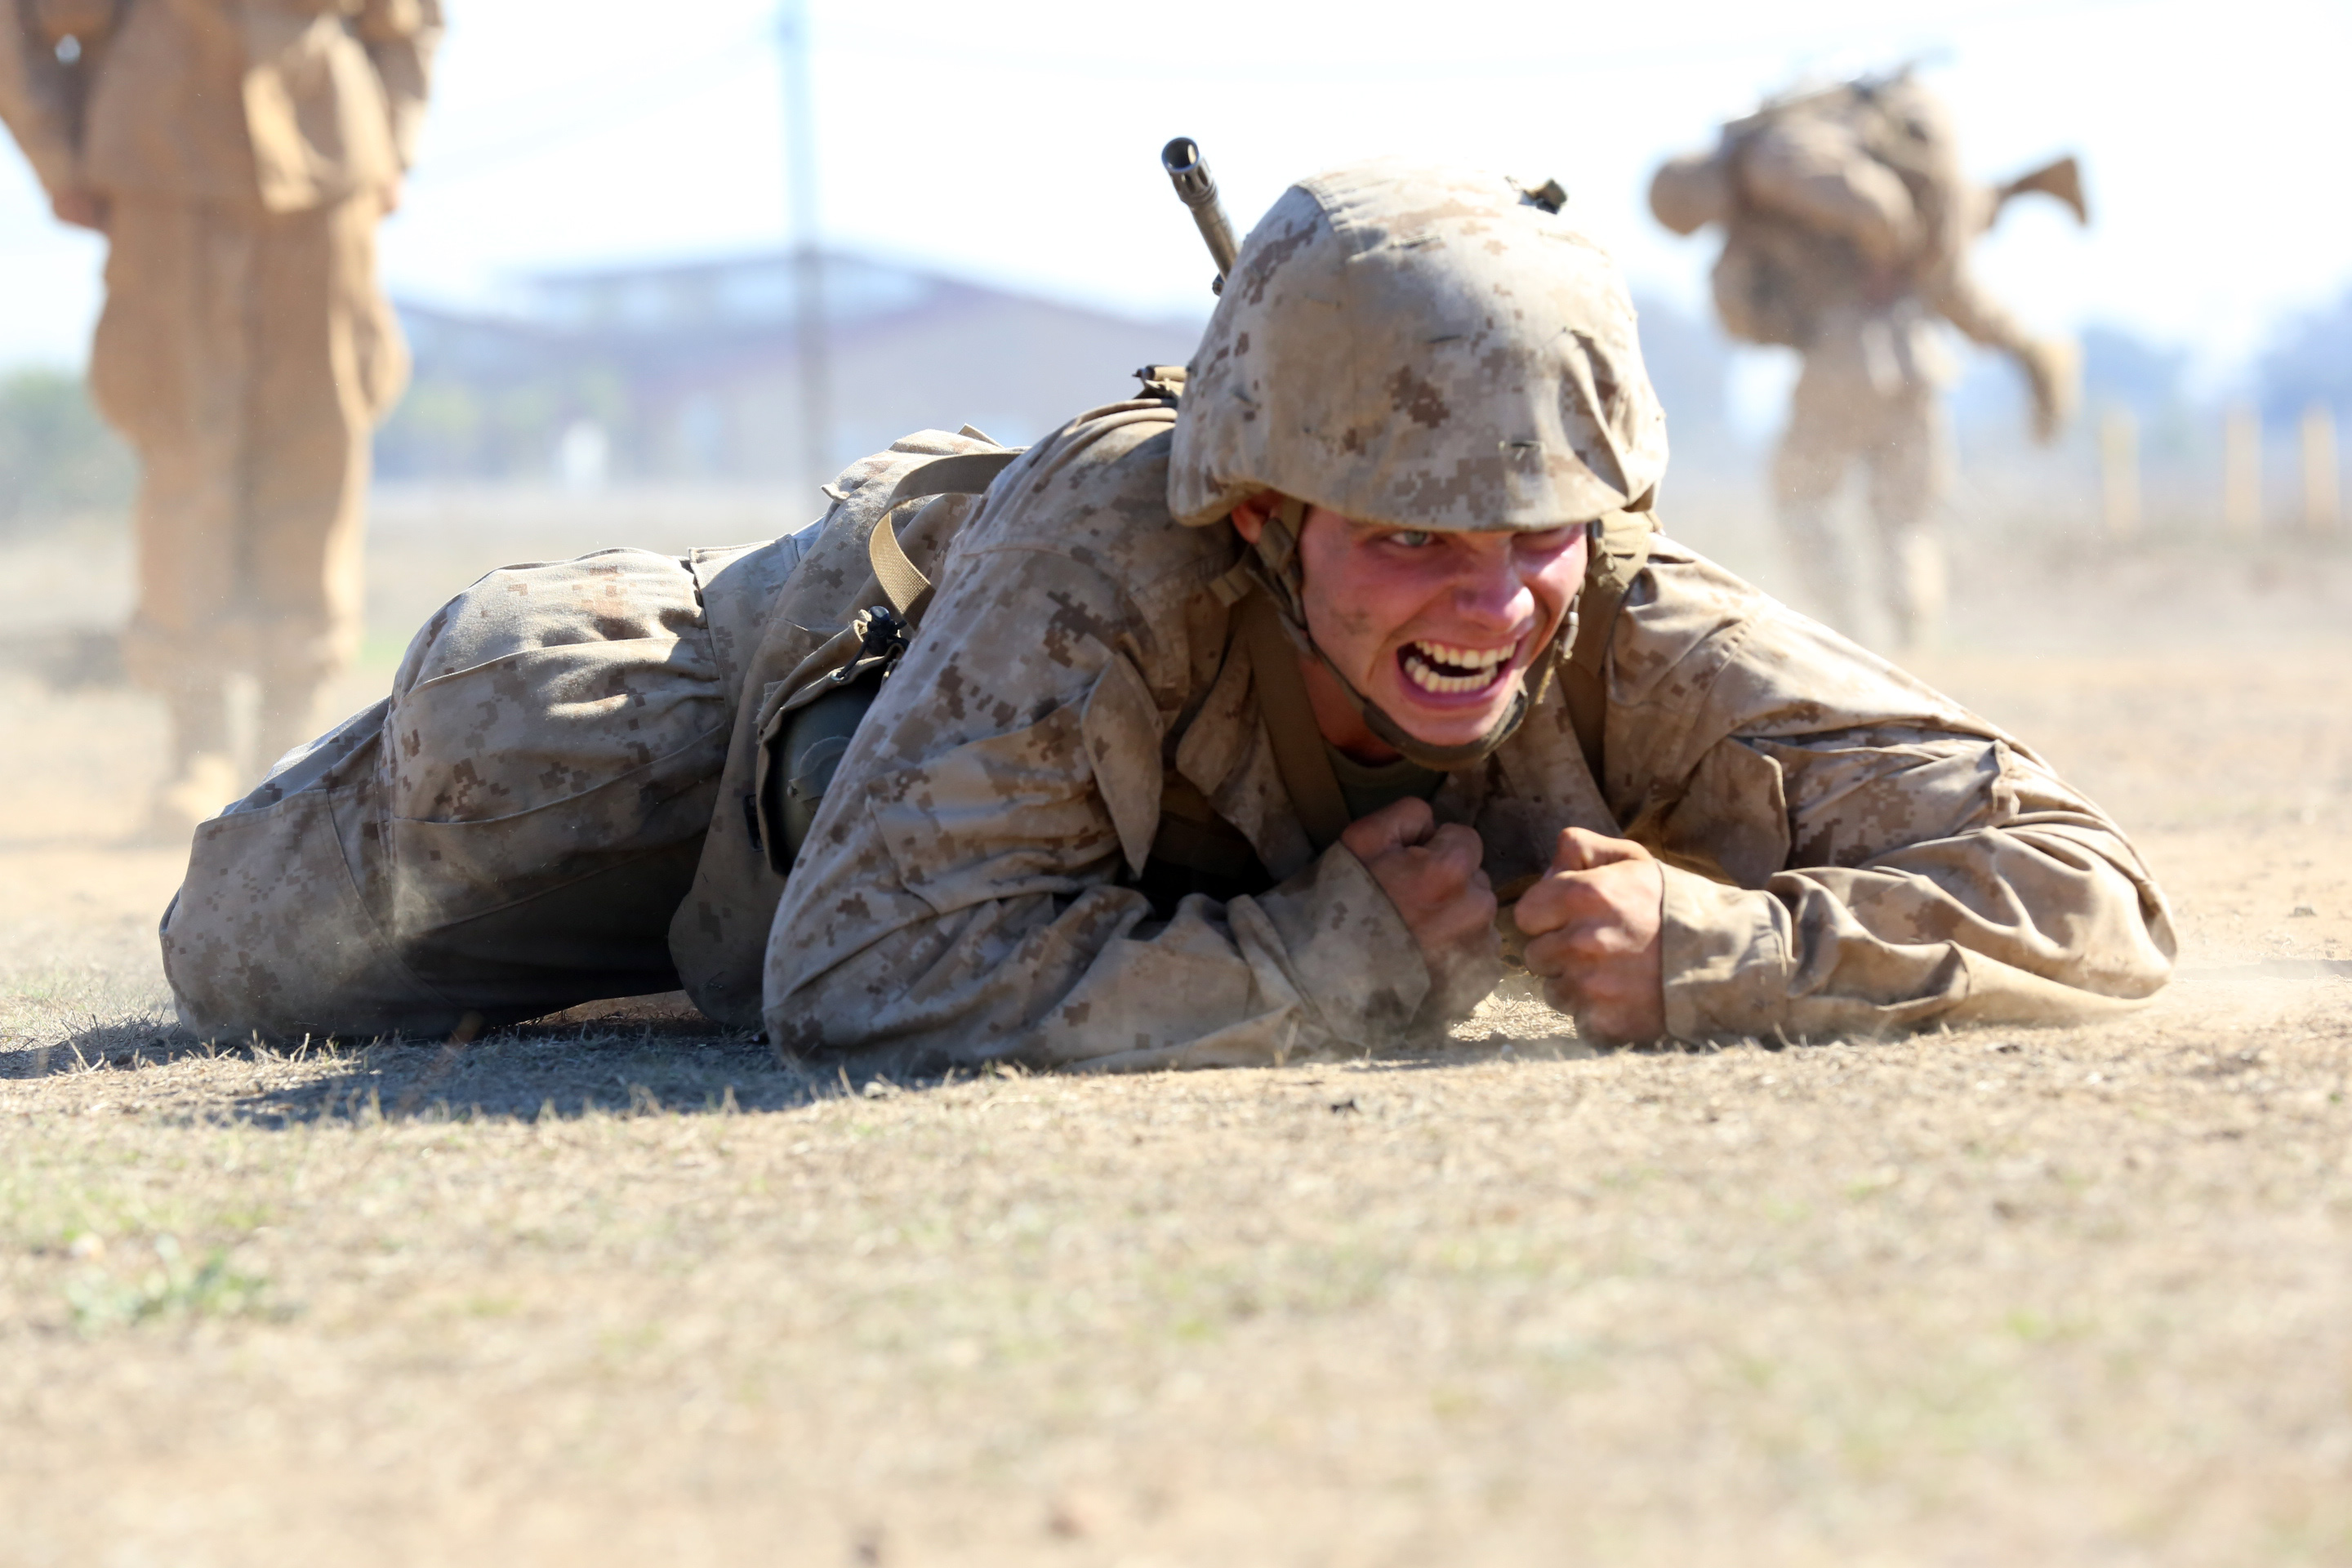 Pvt. Daniel R. Toman, Platoon 3201, Co. I, 3rd Recruit Training Battalion, low-crawls after throwing a simulated grenade during the Crucible at Edson Range aboard Marine Corps Base Camp Pendleton, Calif., Nov. 13.